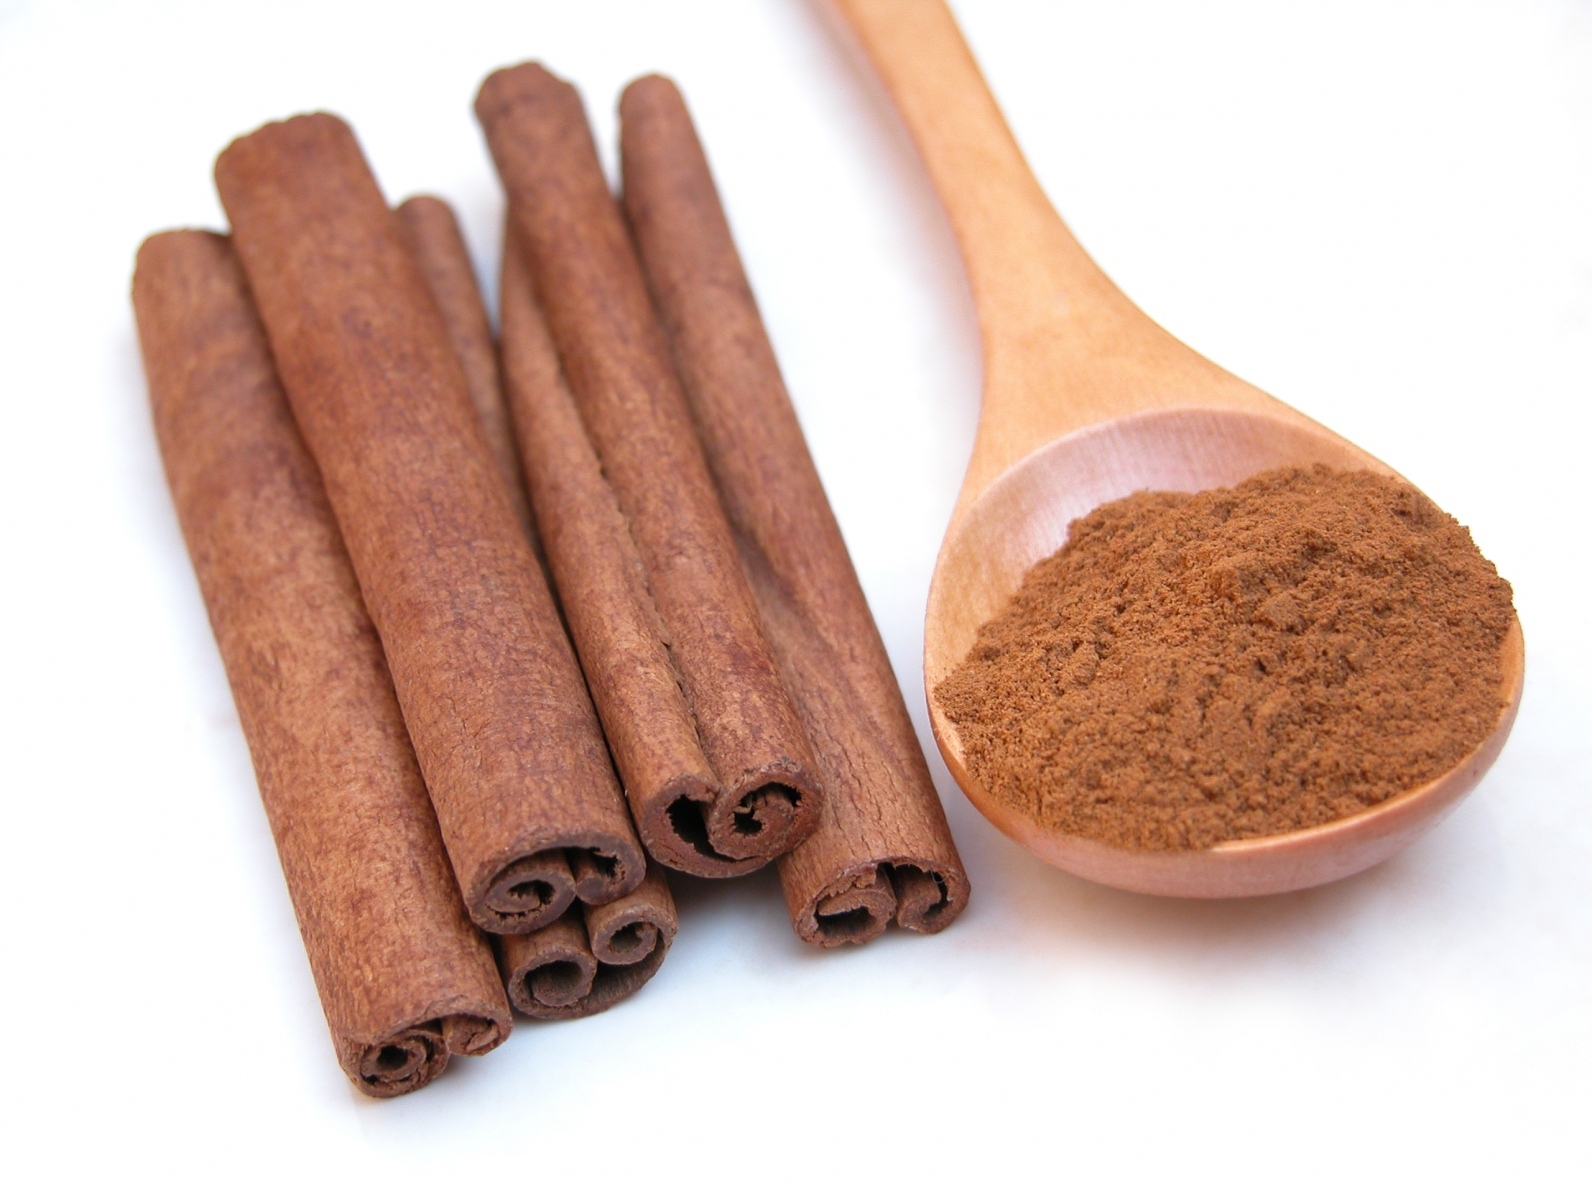 is it just me or have you noticed that cinnamon appears to be a hot ...